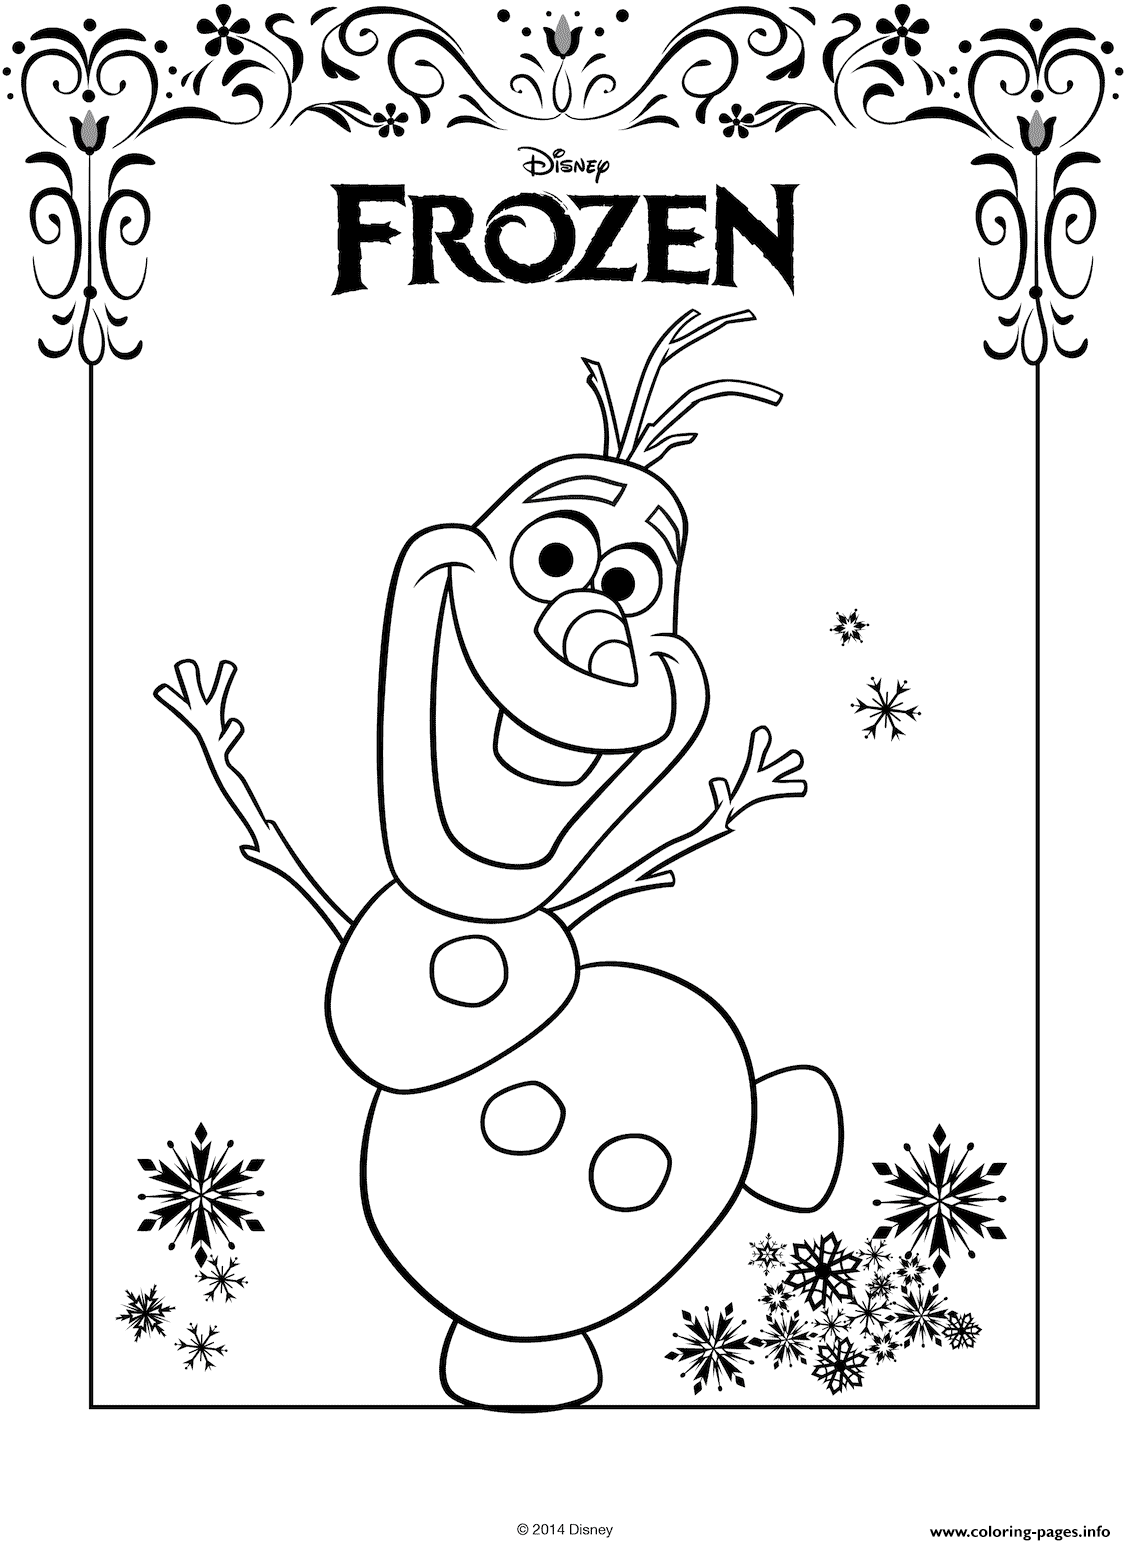 Olaf With Disney Frozen Logo Coloring page Printable